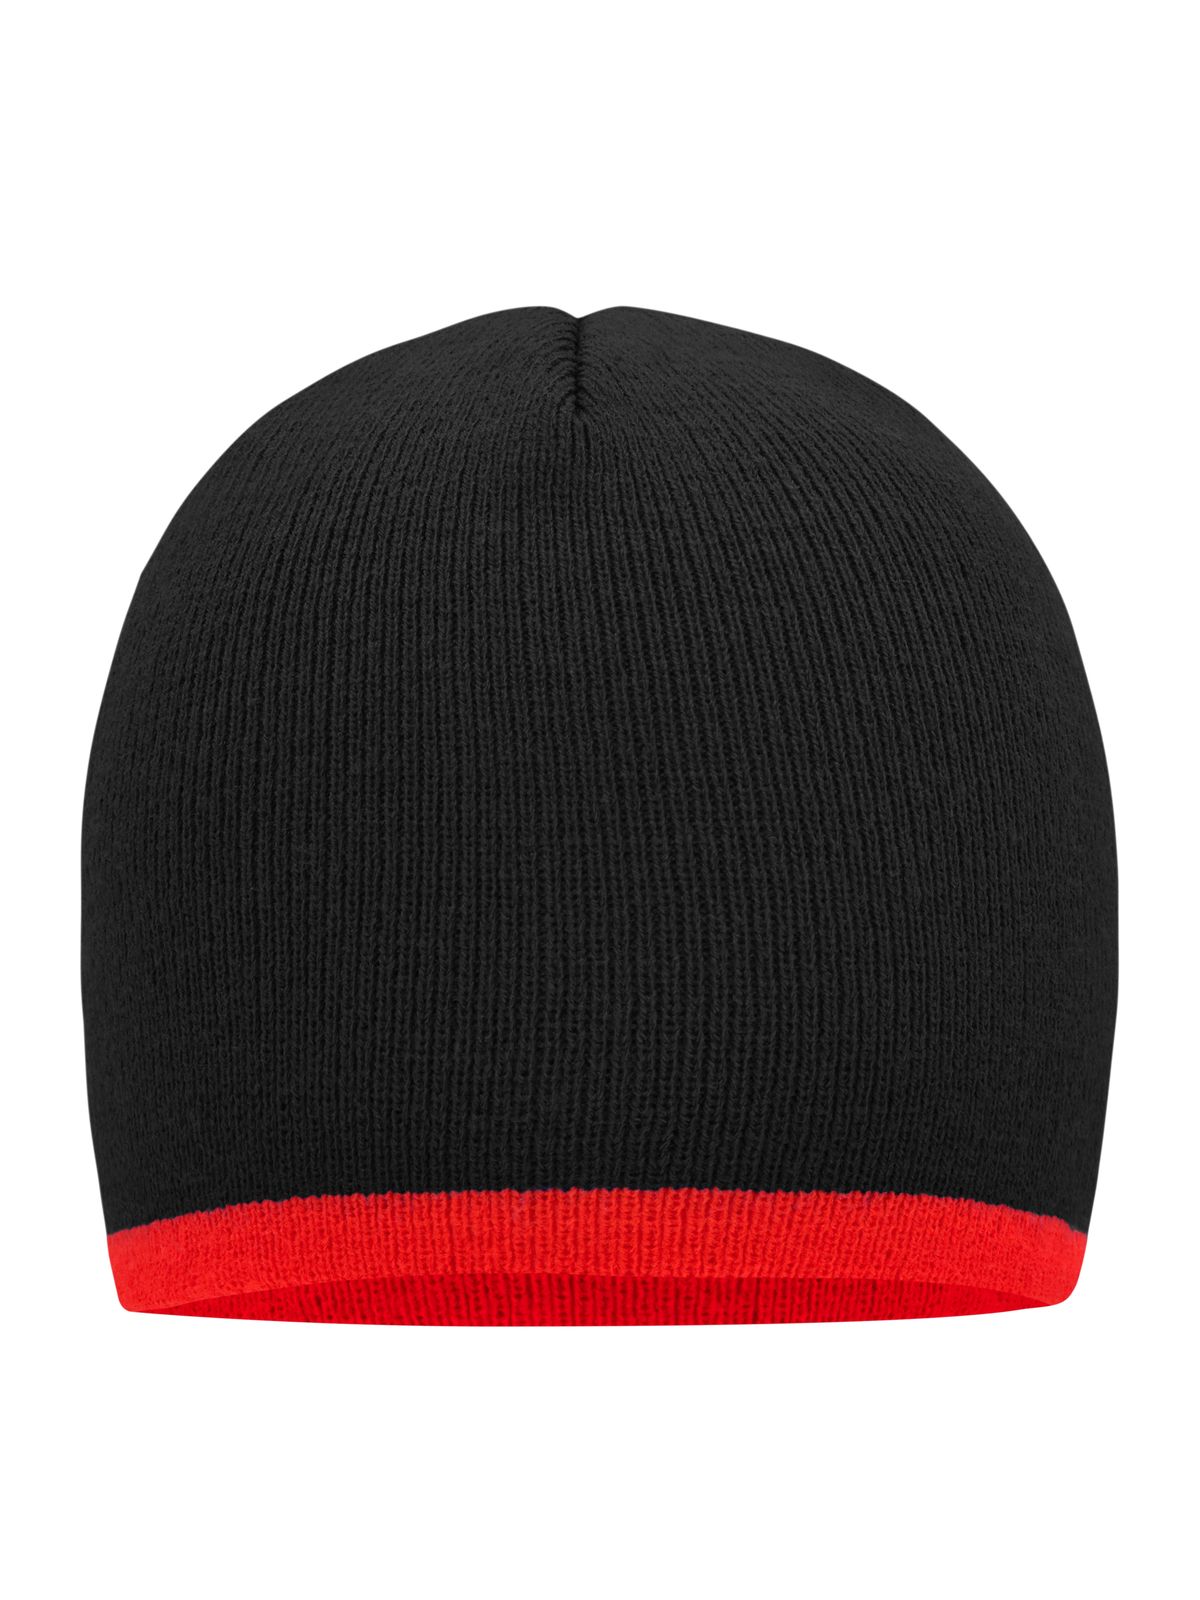 beanie-with-contrasting-border-black-red.webp